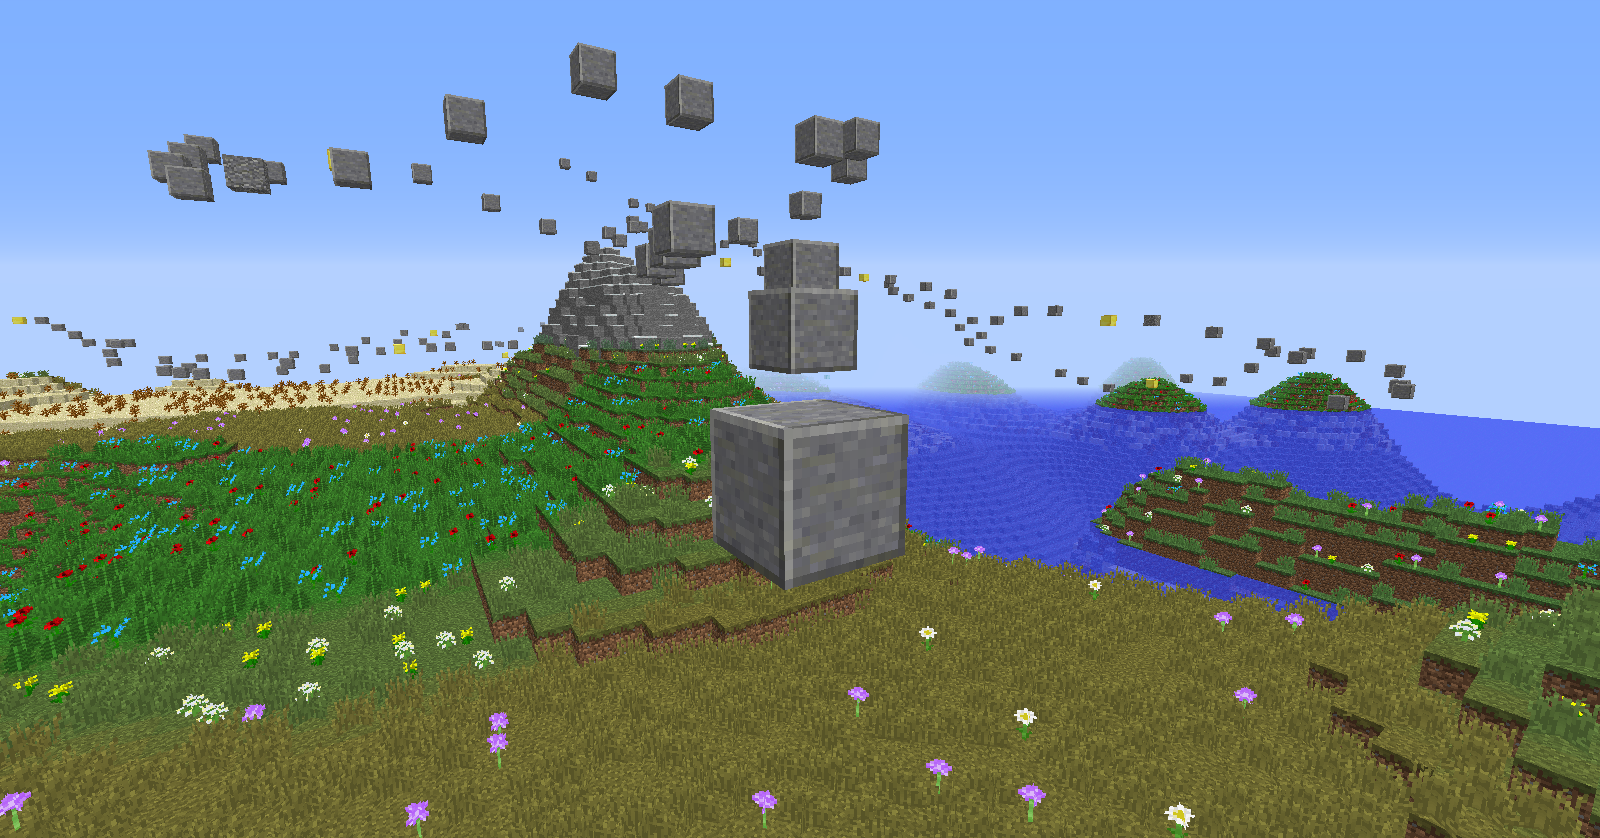 http://www.minecraftmaps.com/images/Planetary%20Parkour%202.png